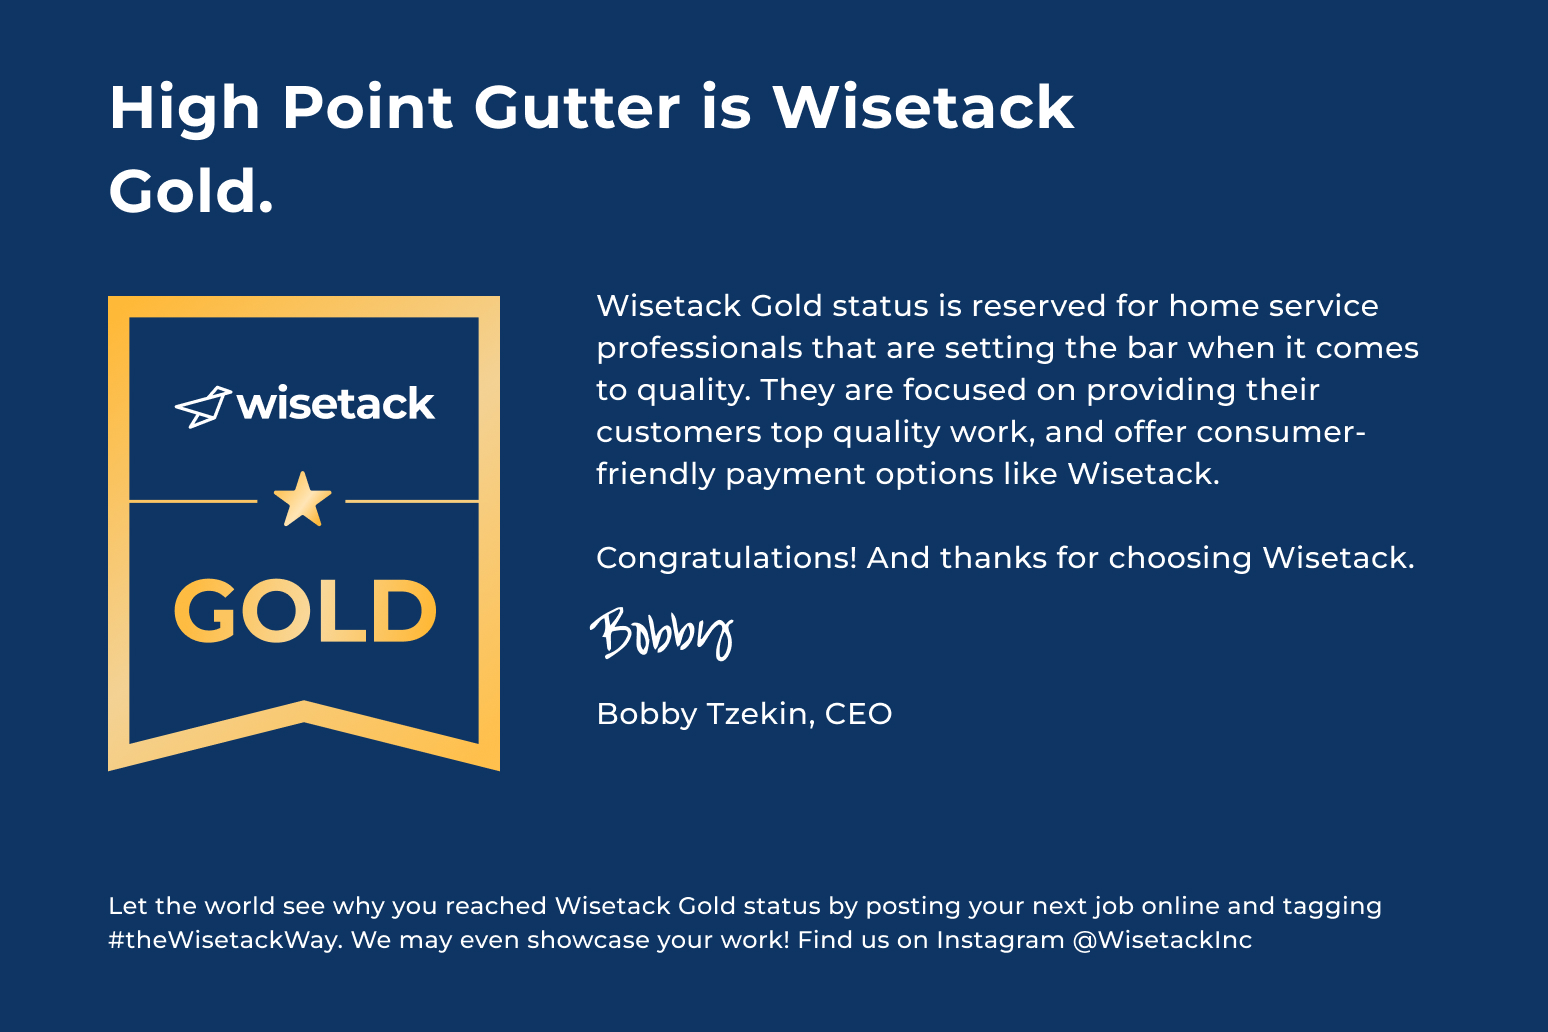 Graphic explaining that High Point Gutter has Wisetack Gold status